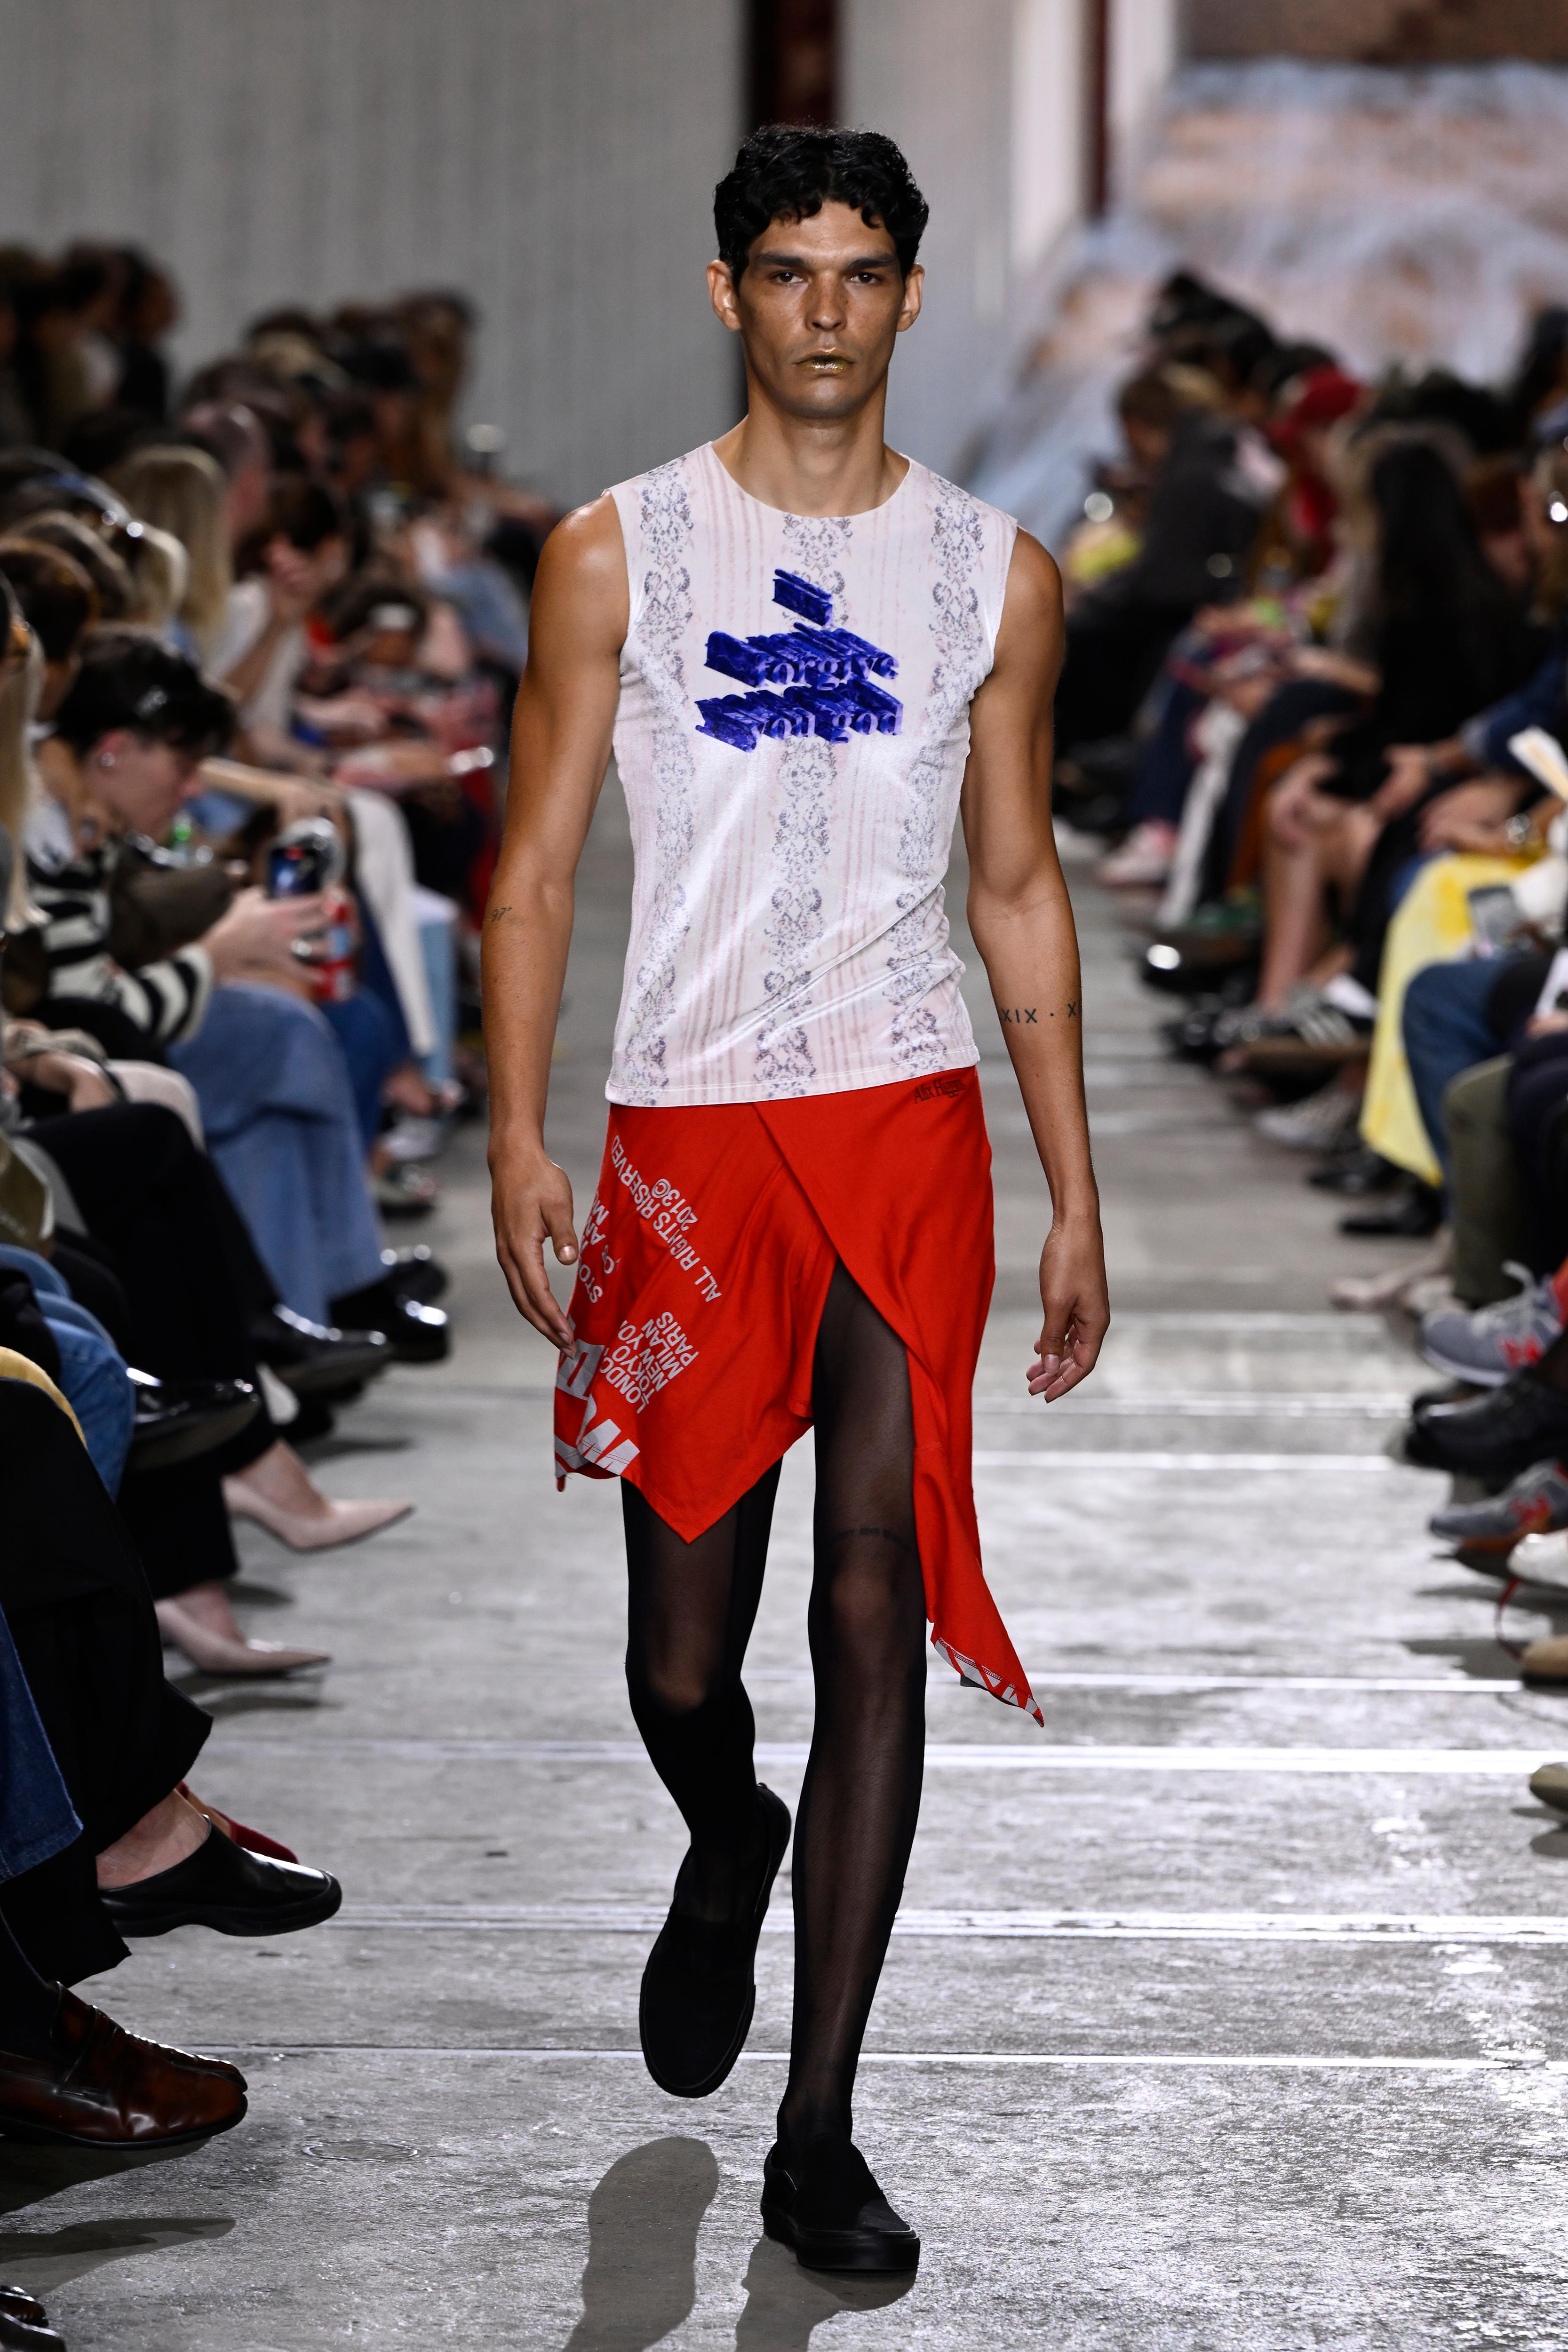 A man walks Higgins 2025 resort runway in a short red skirt and a tight singlet, the show's title printed over a floral print..